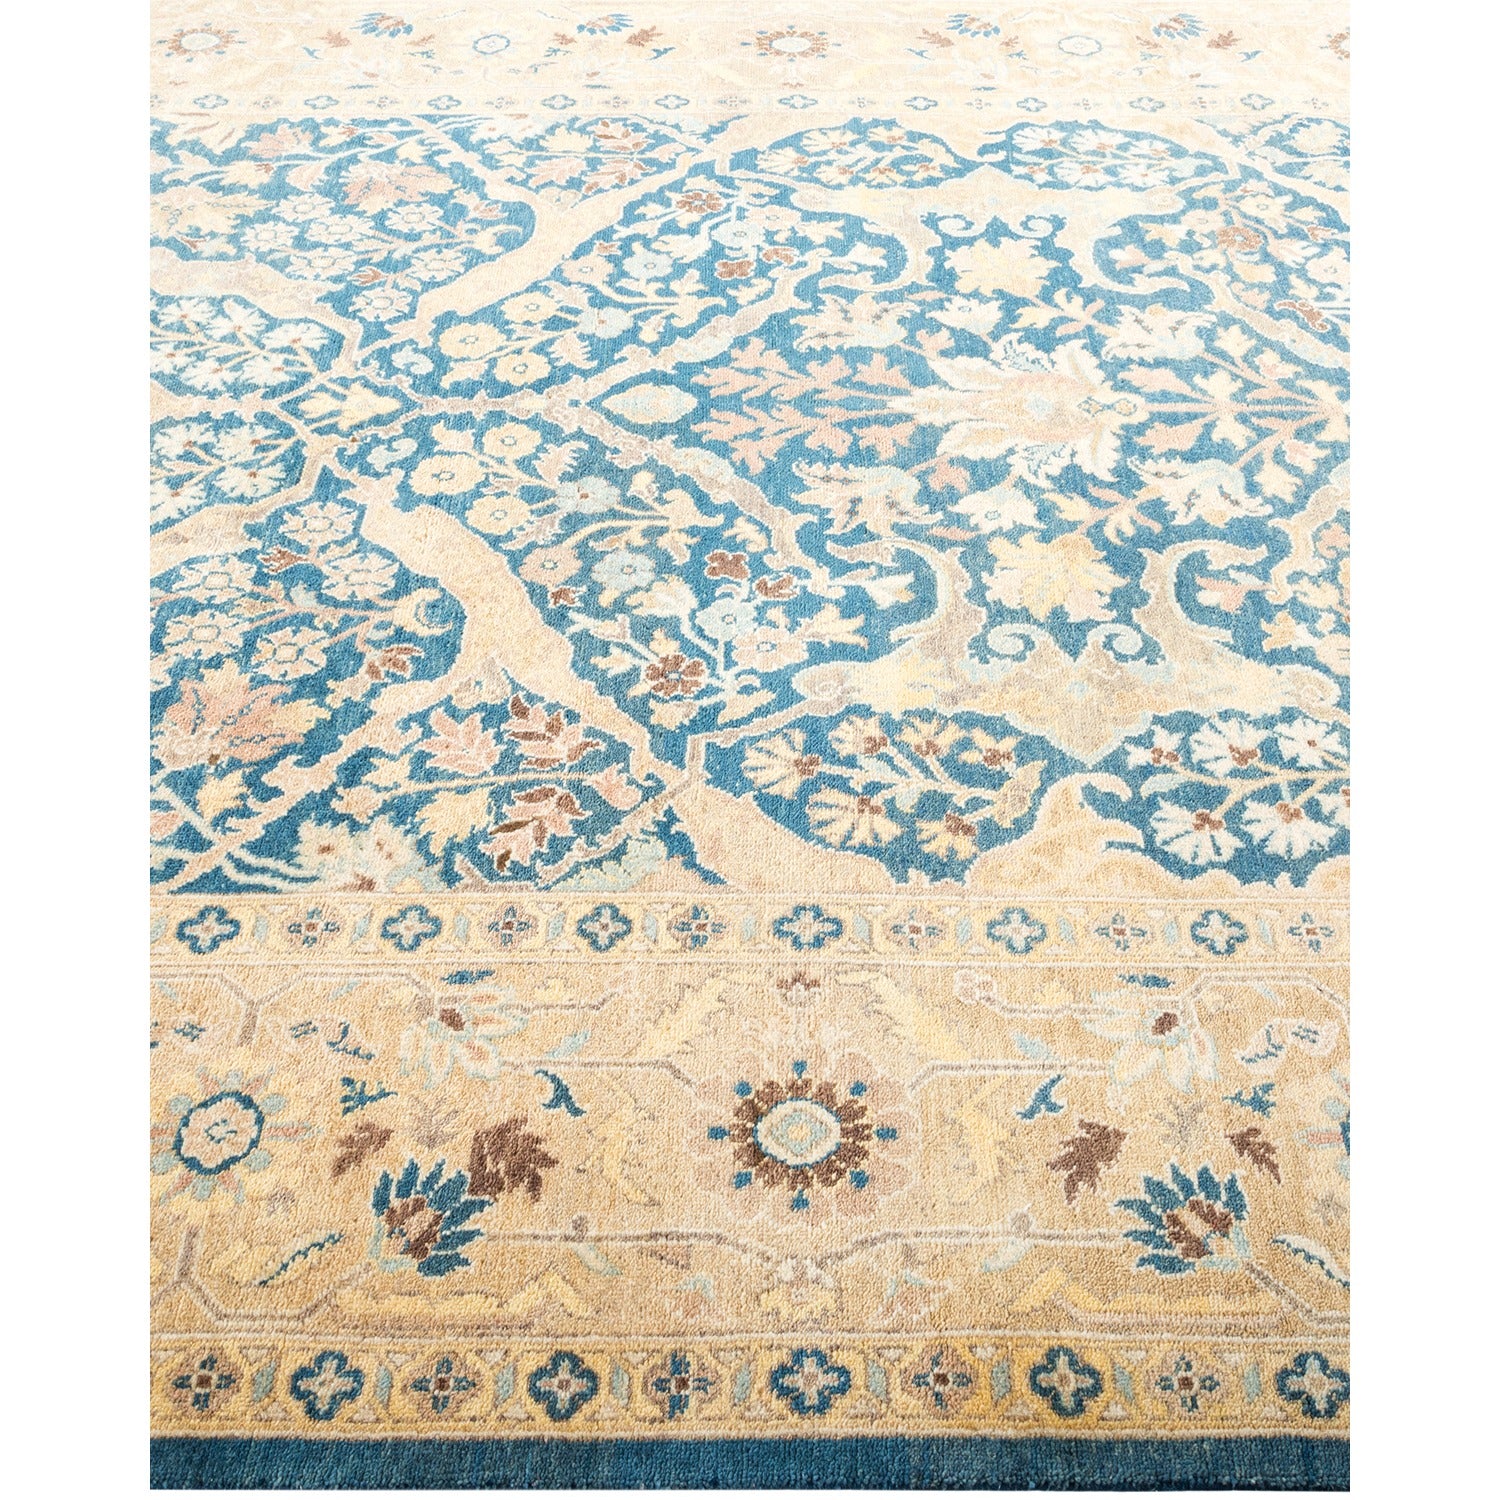 Detailed and ornate area rug with intricate patterns and floral motifs.